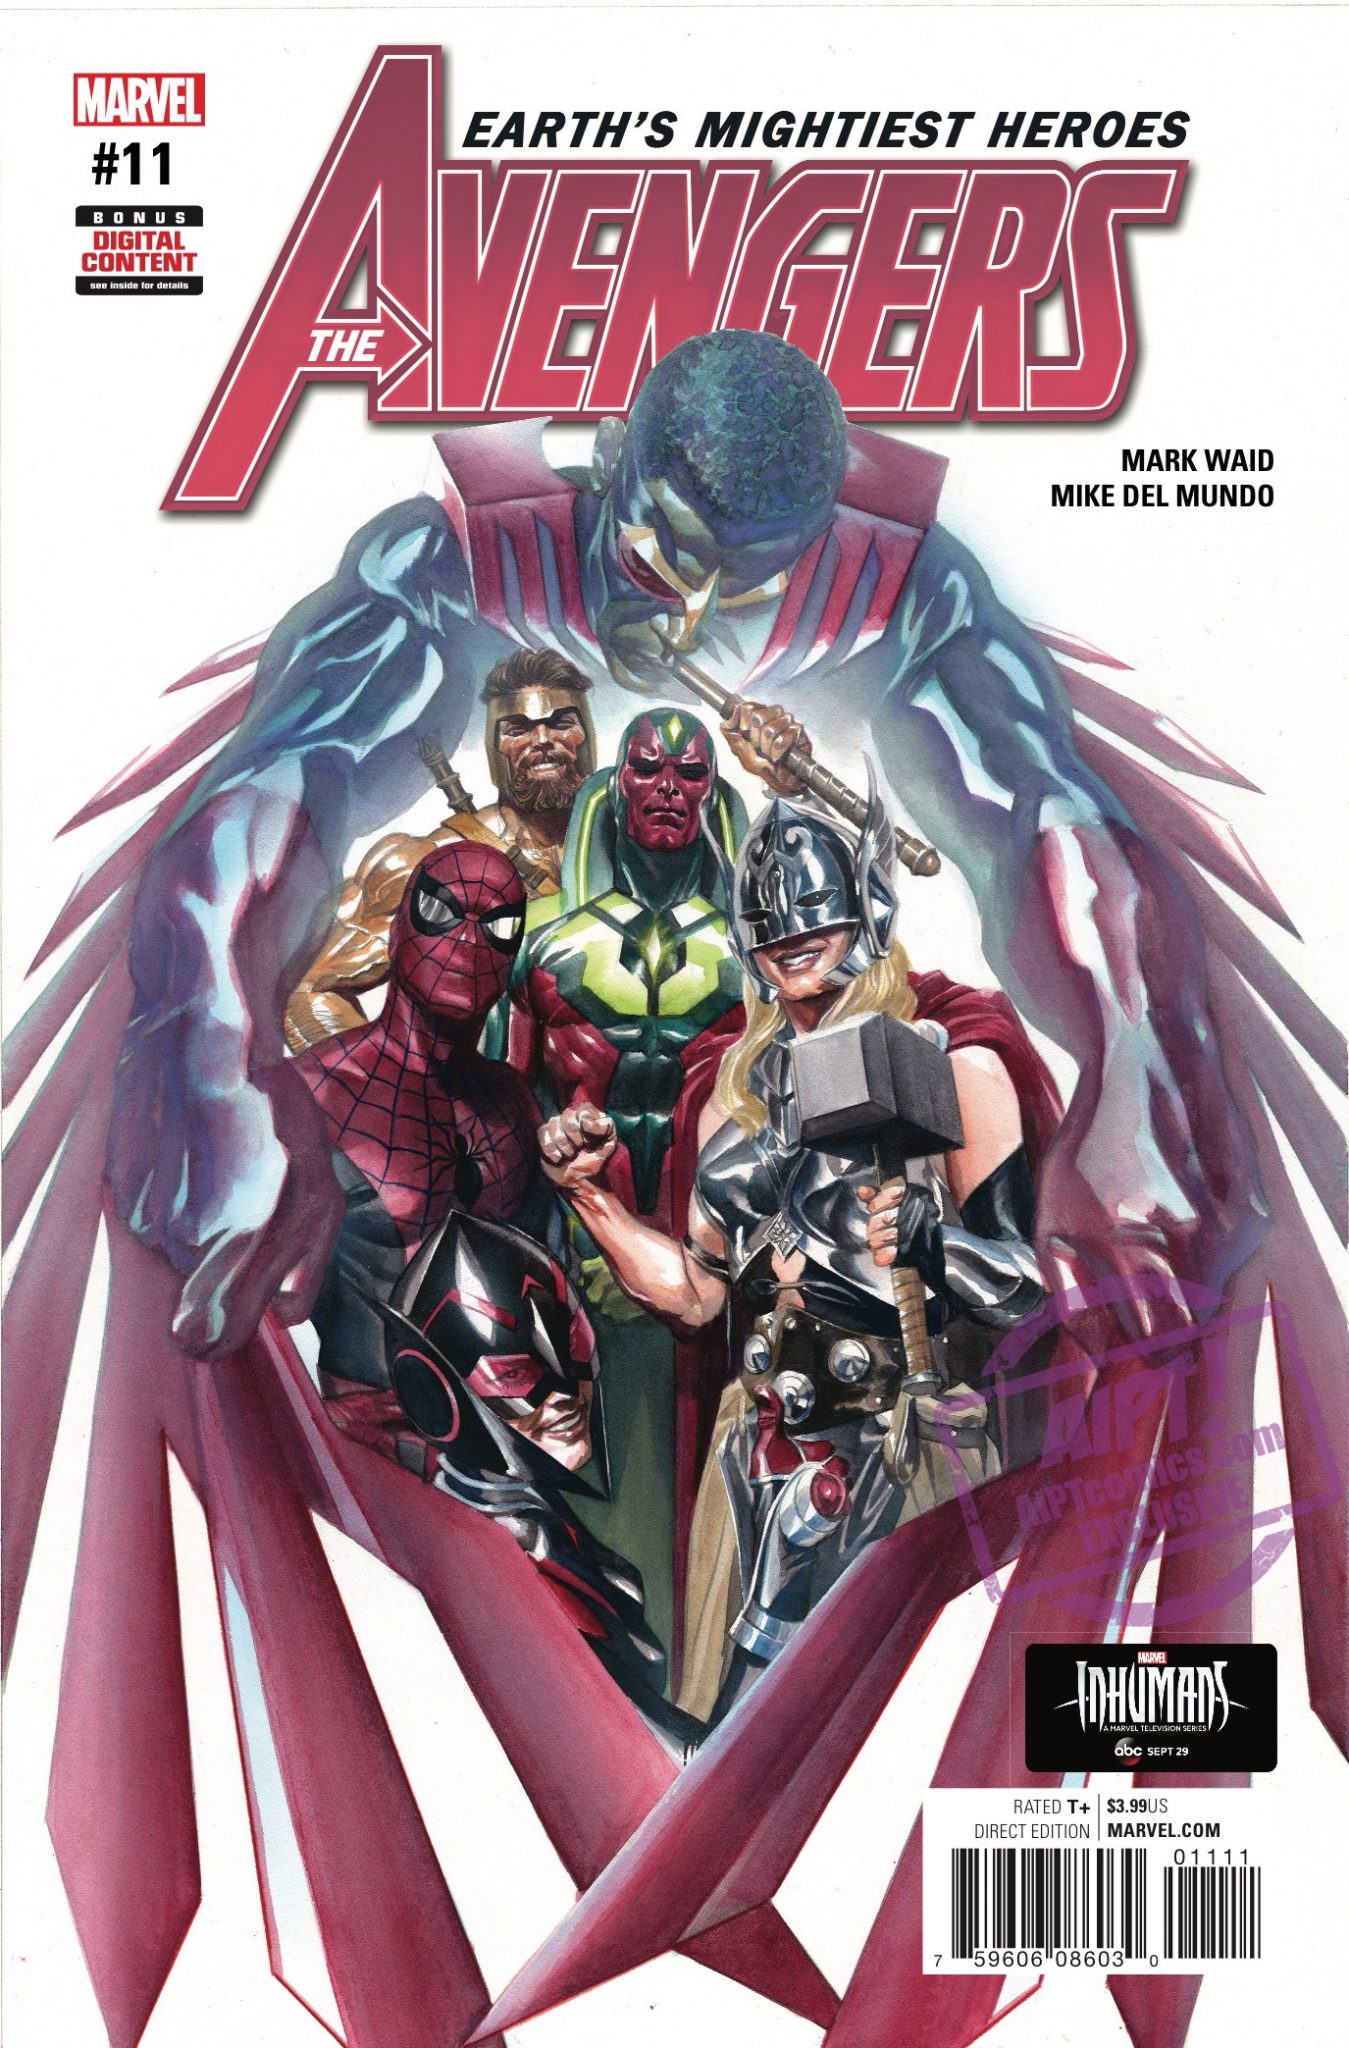 [EXCLUSIVE] Marvel Preview: Avengers #11